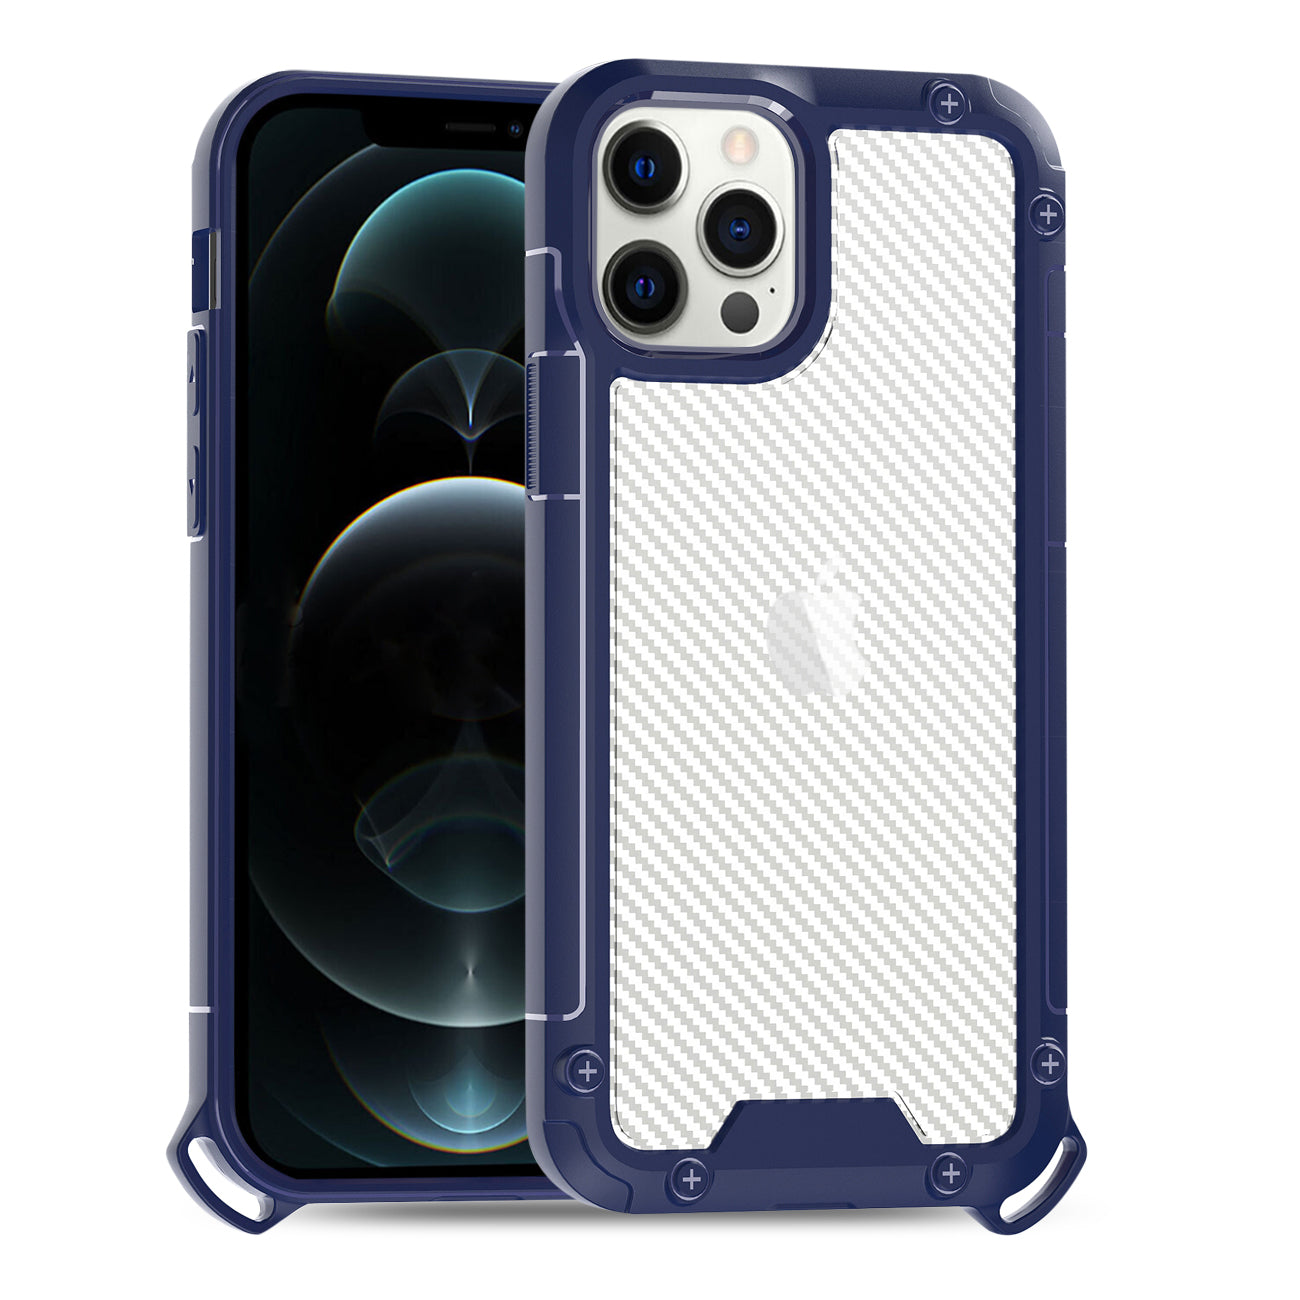 Reiko Shockproof PC Bumper Case With Carbon Fiber Pattern In Navy For iPhone 12 / 12 Pro